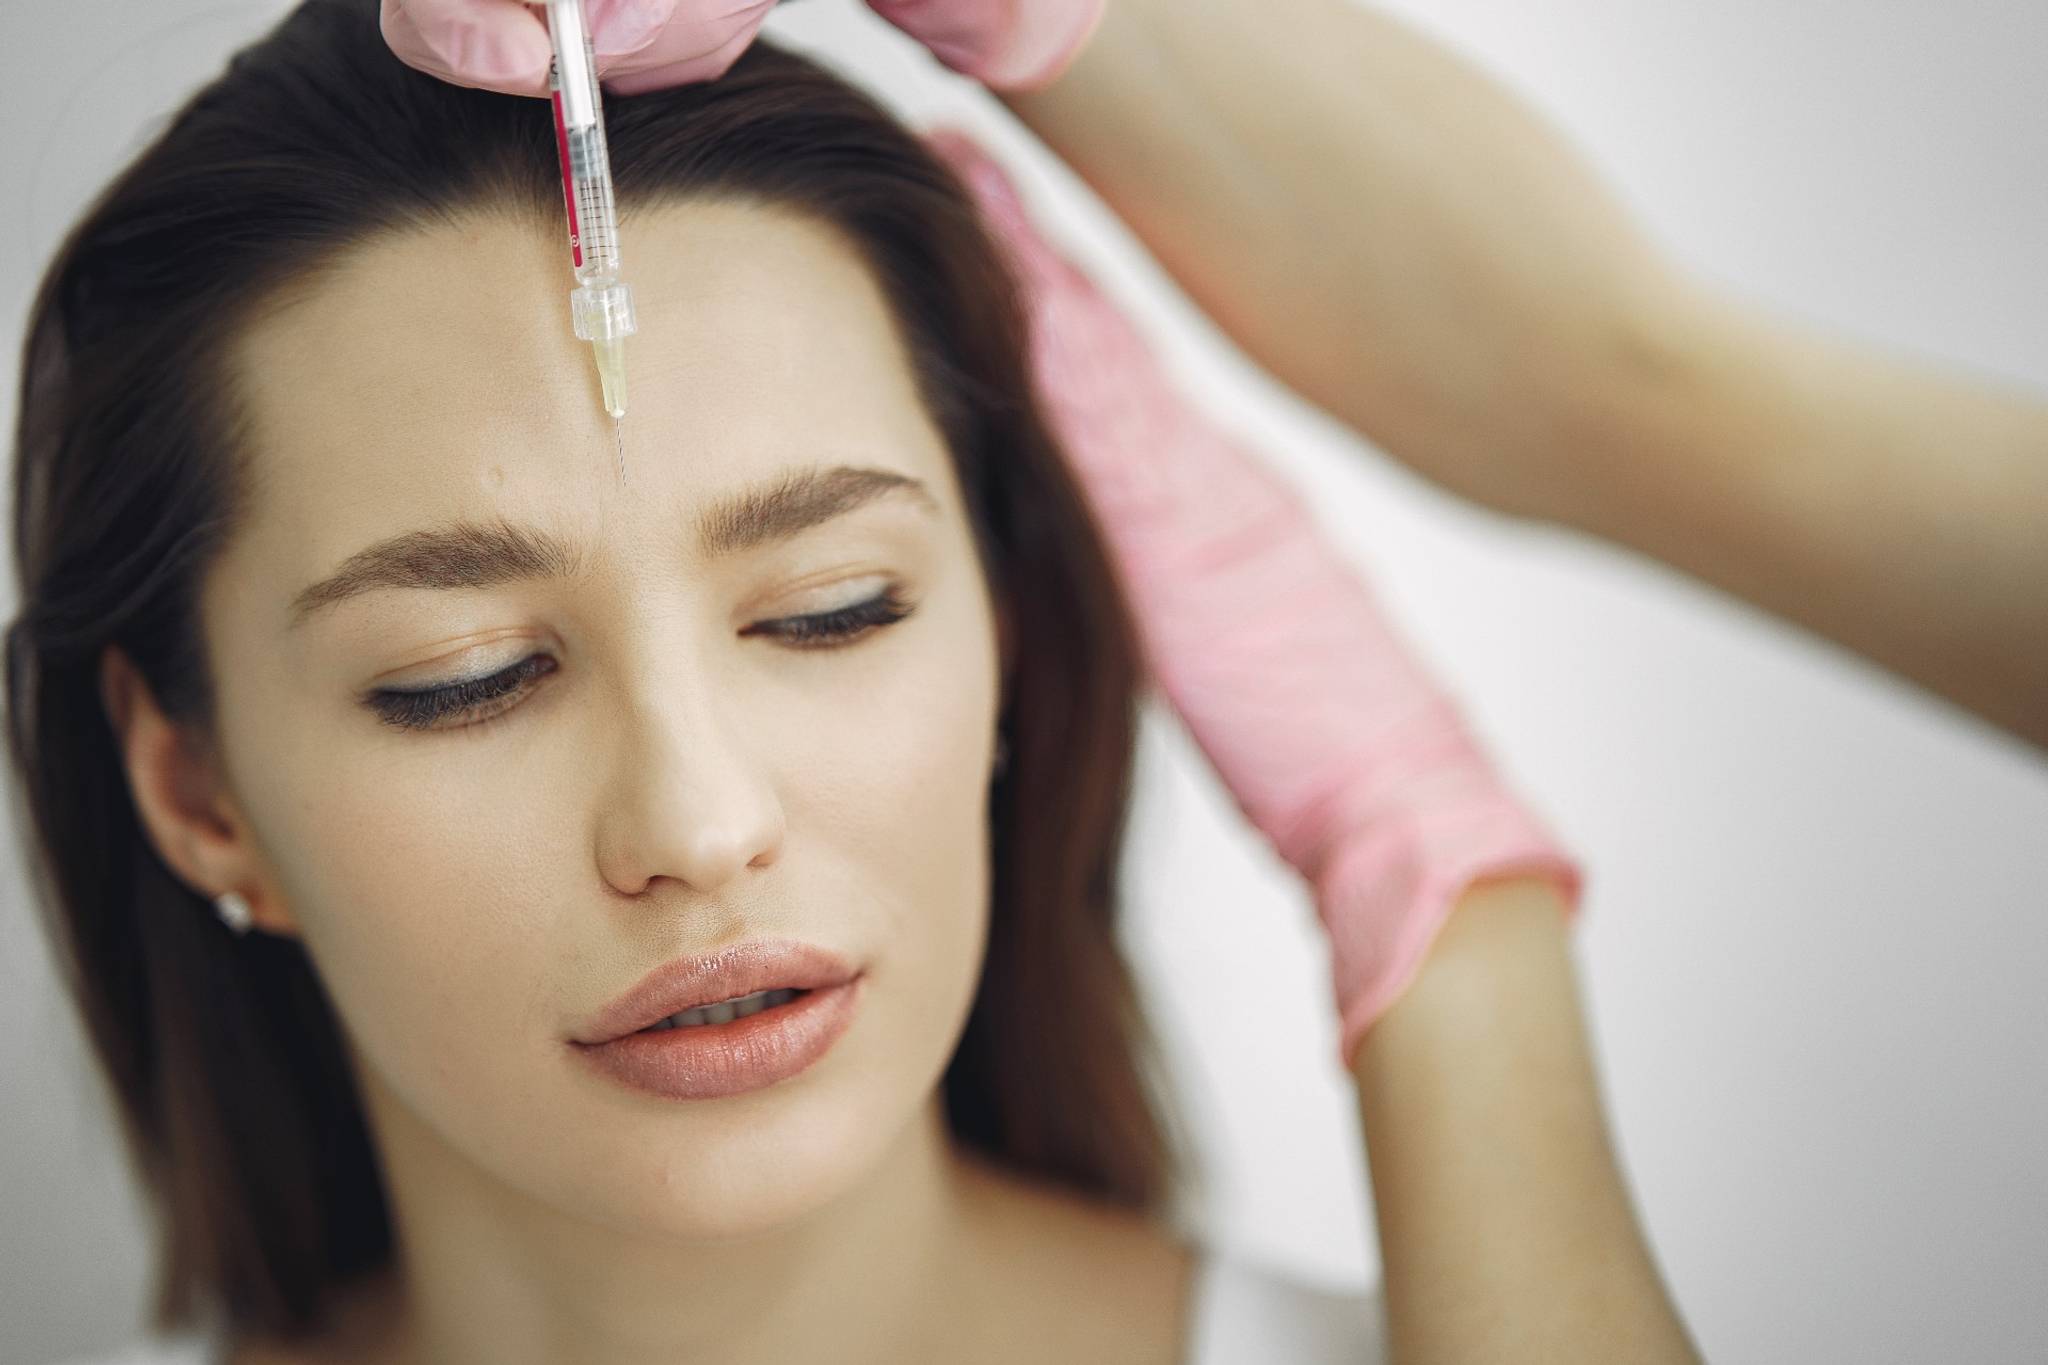 The 'Zoom effect' drives up interest in plastic surgery